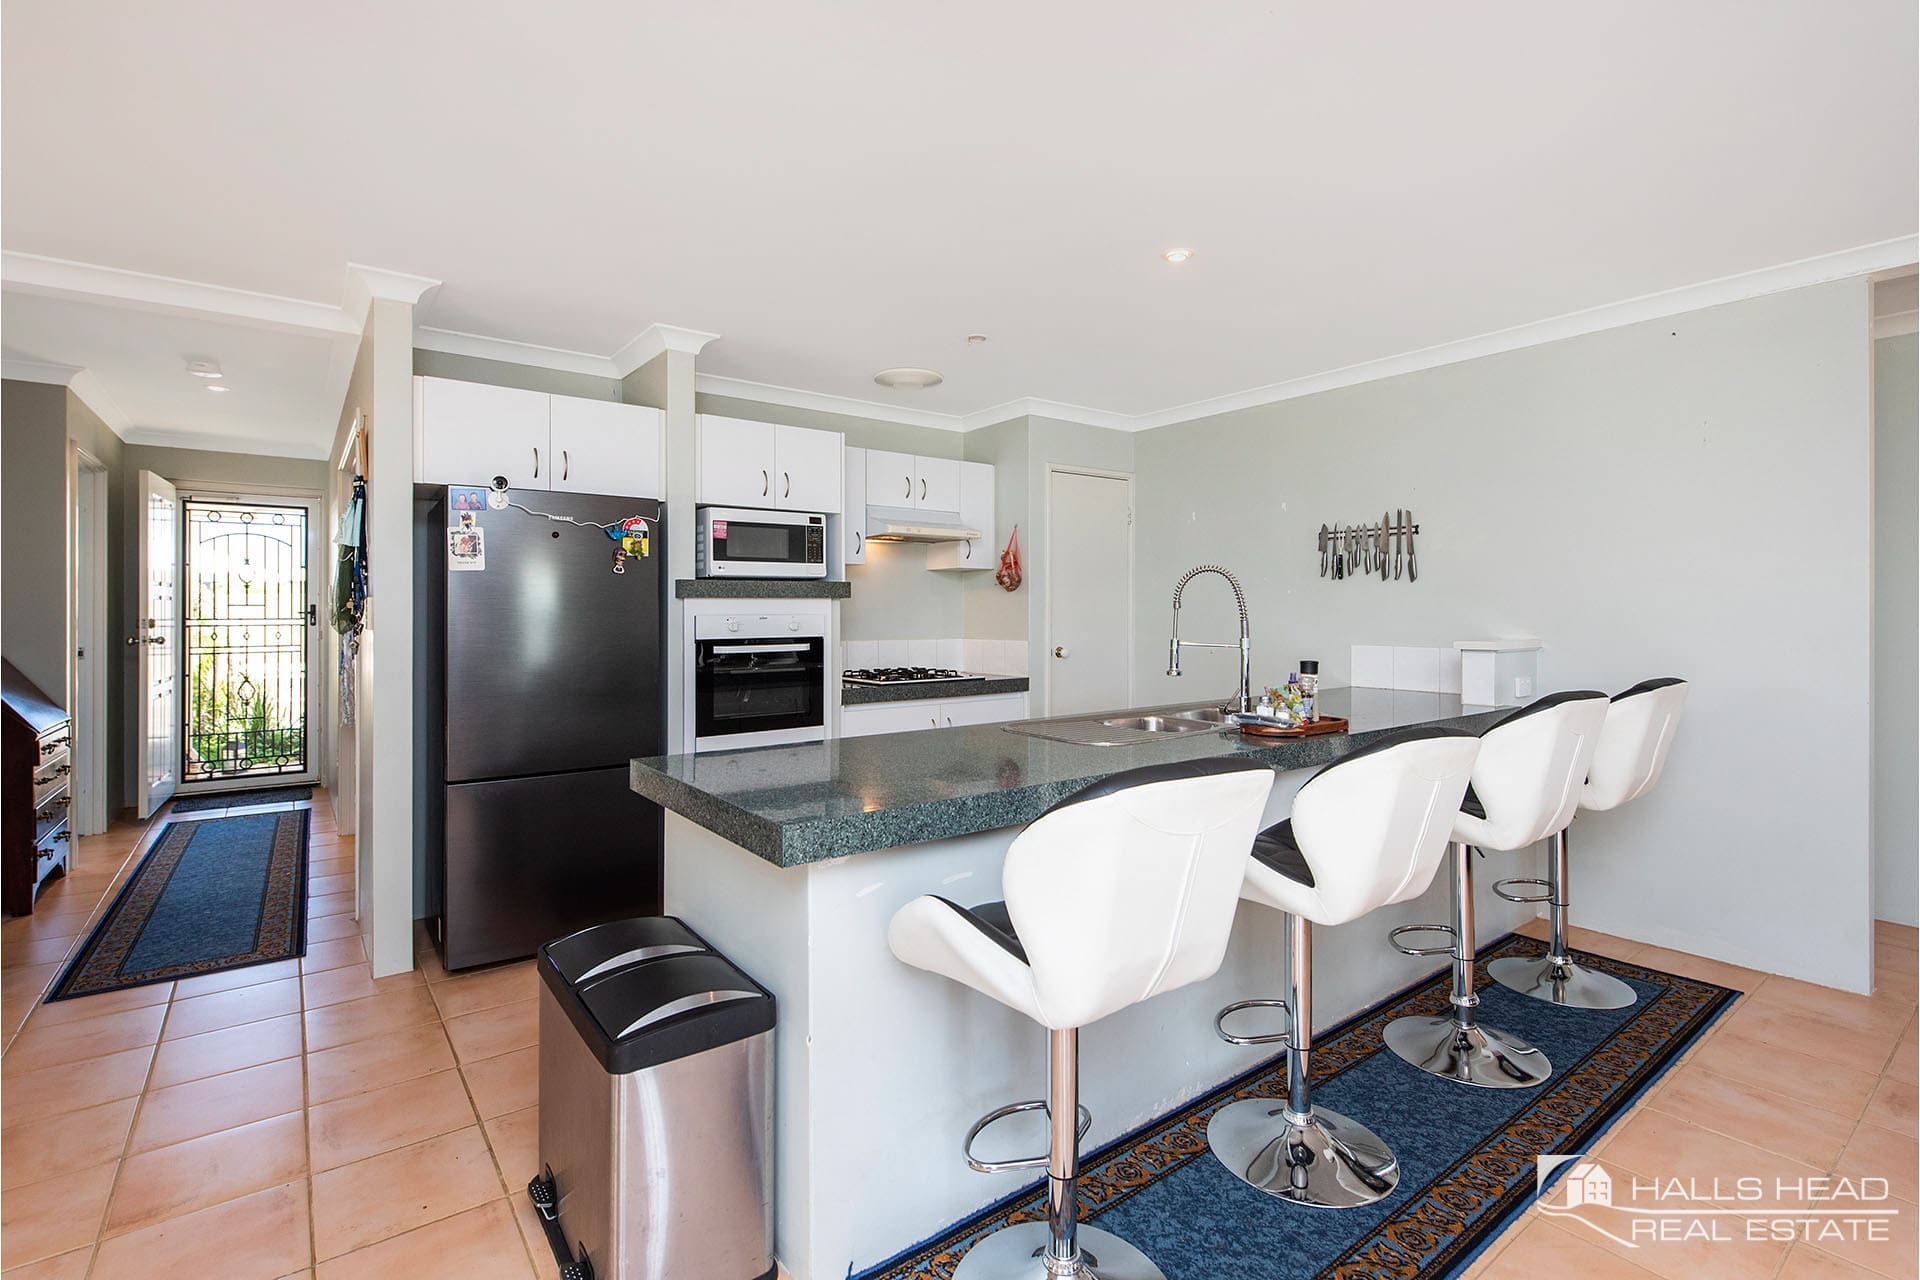 52 Mariners Cove Drive Dudley Park Kitchen breakfast bar